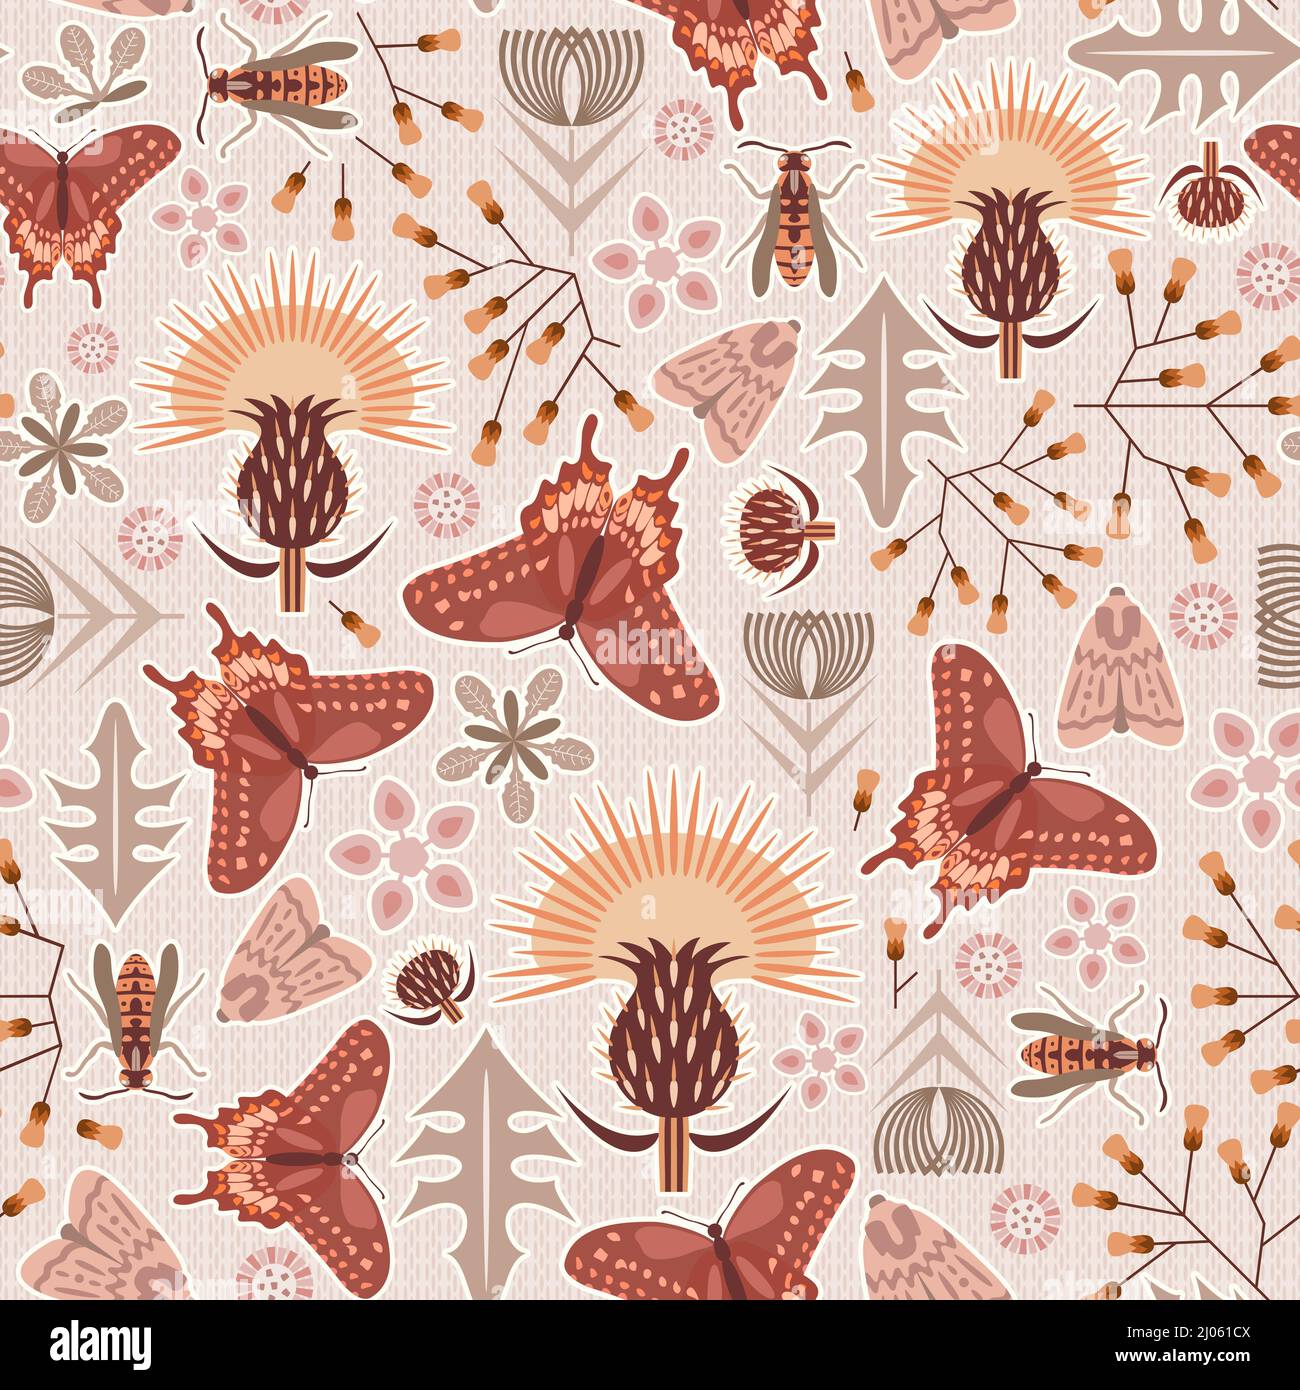 Herbaceous prickly stylized thistle and other “unwanted” plants aka weeds surrounded by pollinators butterflies, wasp and moth. Earthy terracotta hues Stock Vector